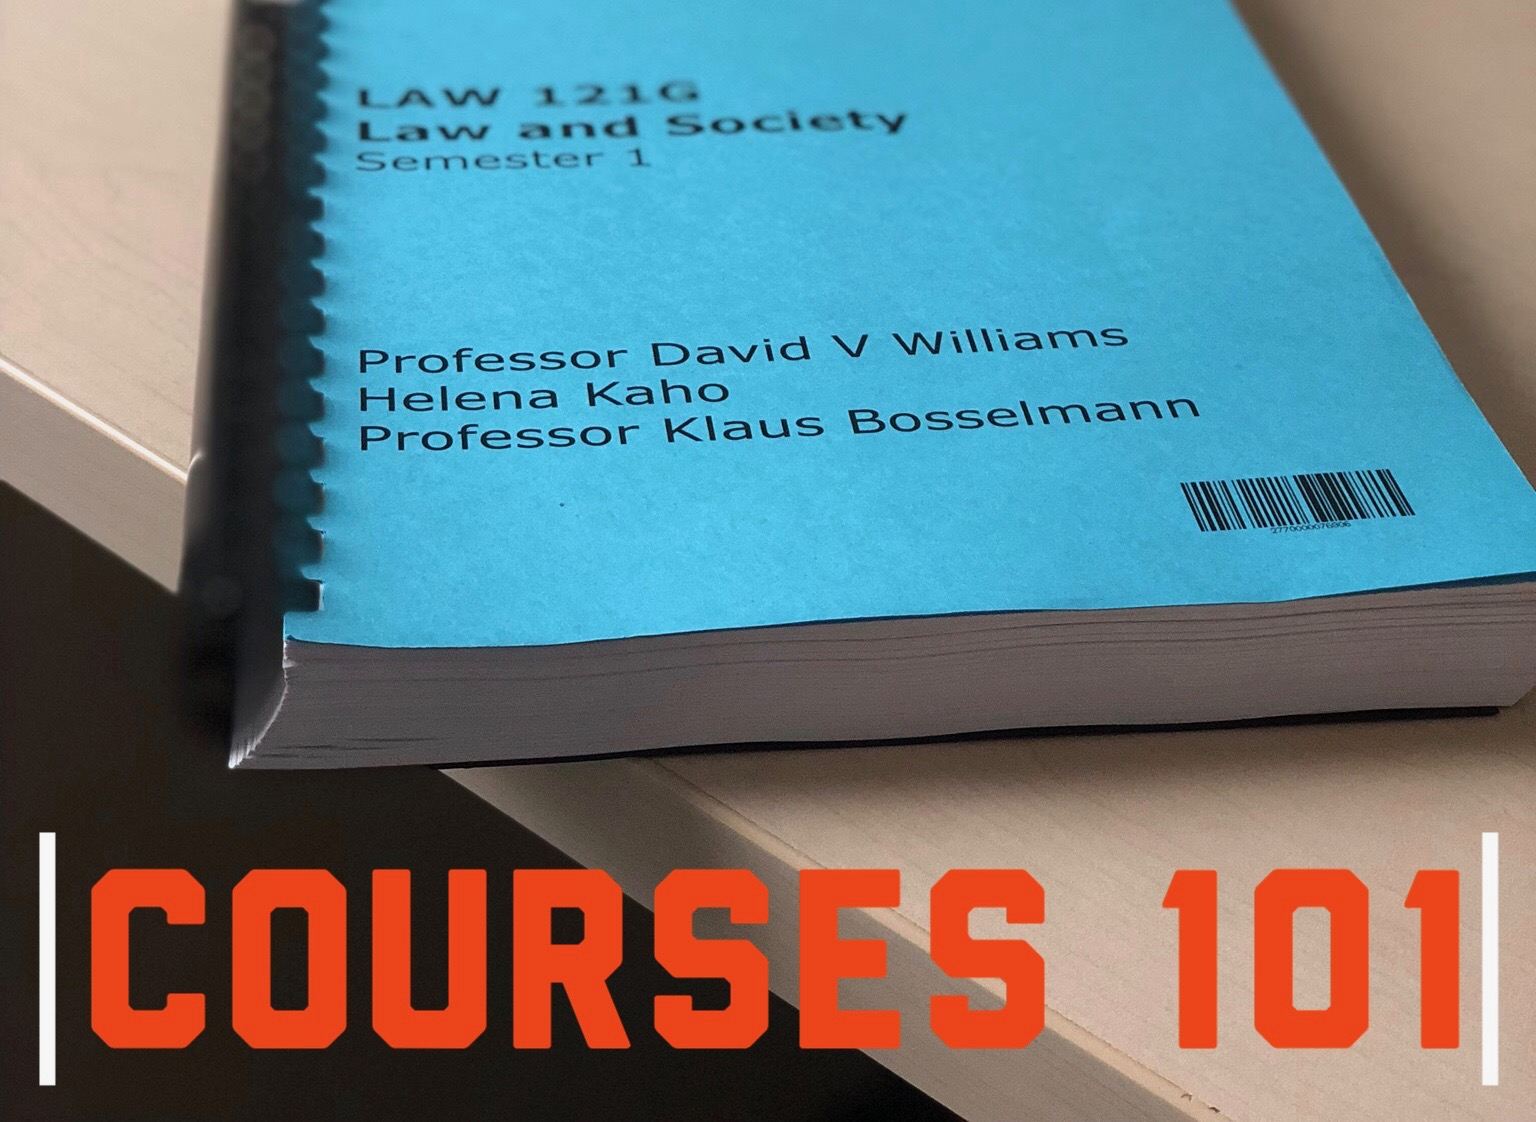 Law Casebook with title Courses 101